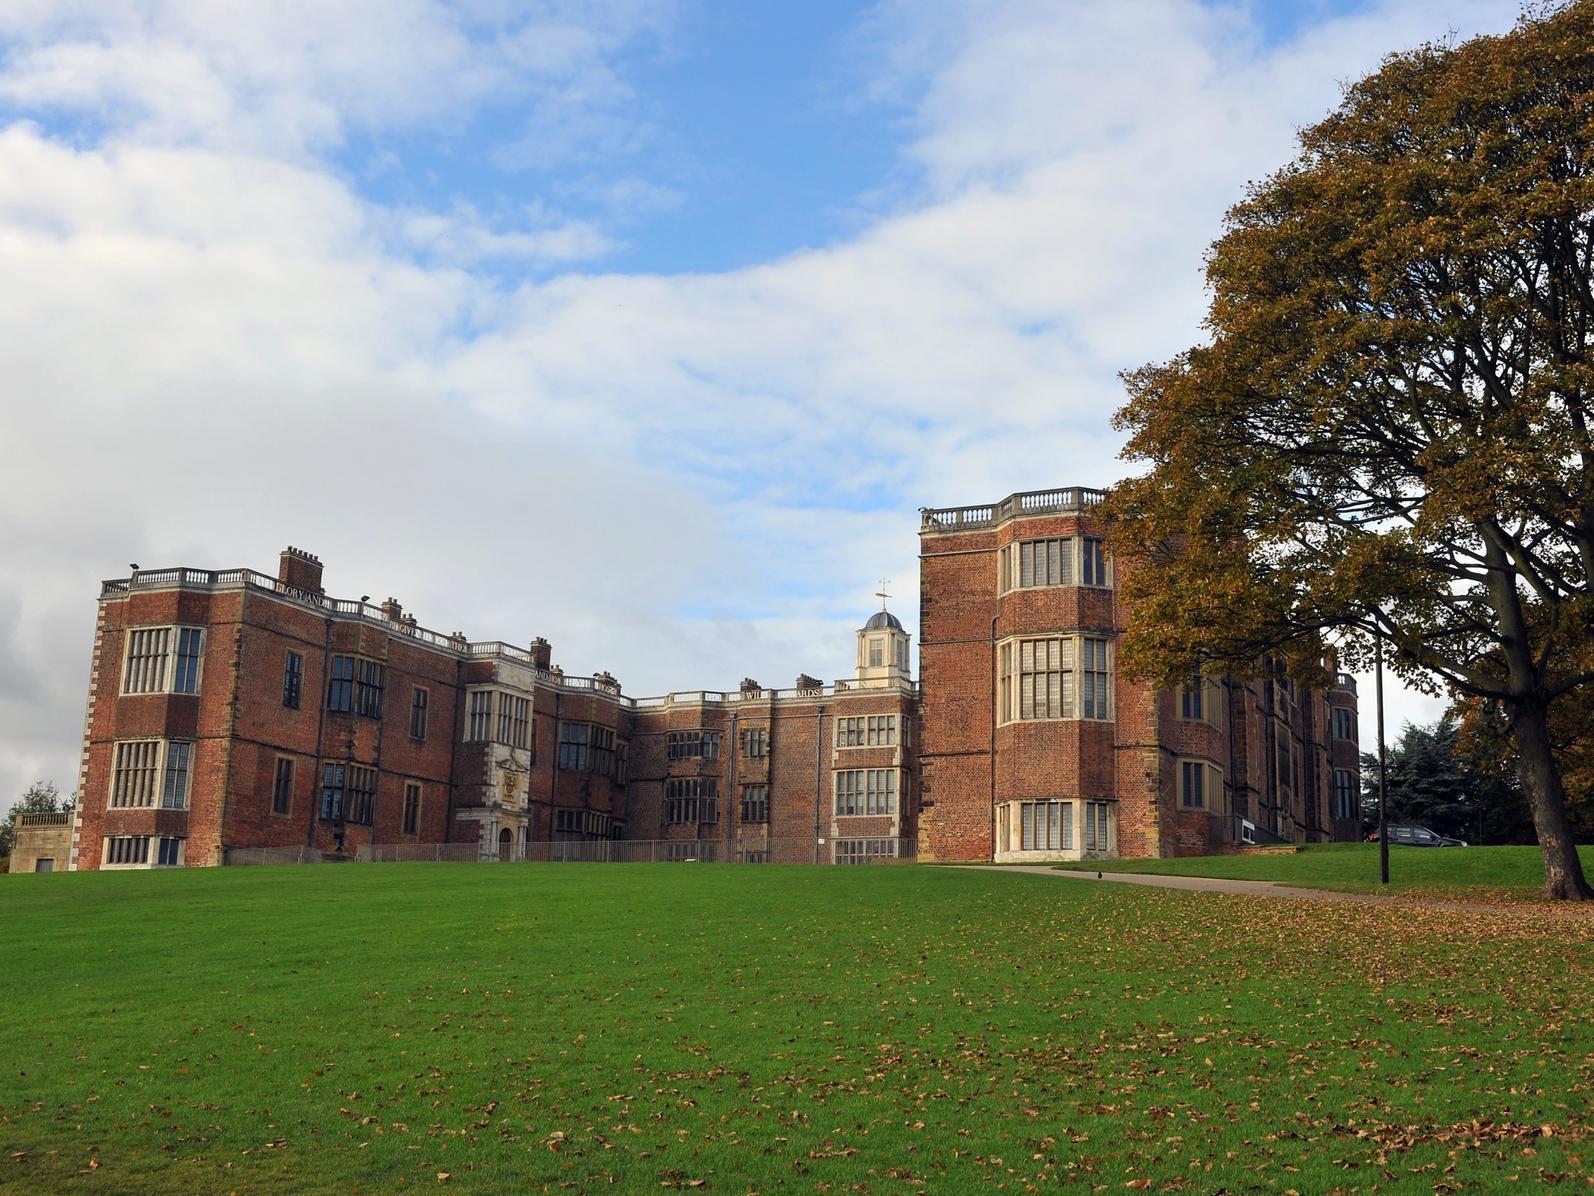 A grand stately home, acres of grounds to explore and a local farm to cuddle animals make Temple Newsam one of the most popular days out in Leeds